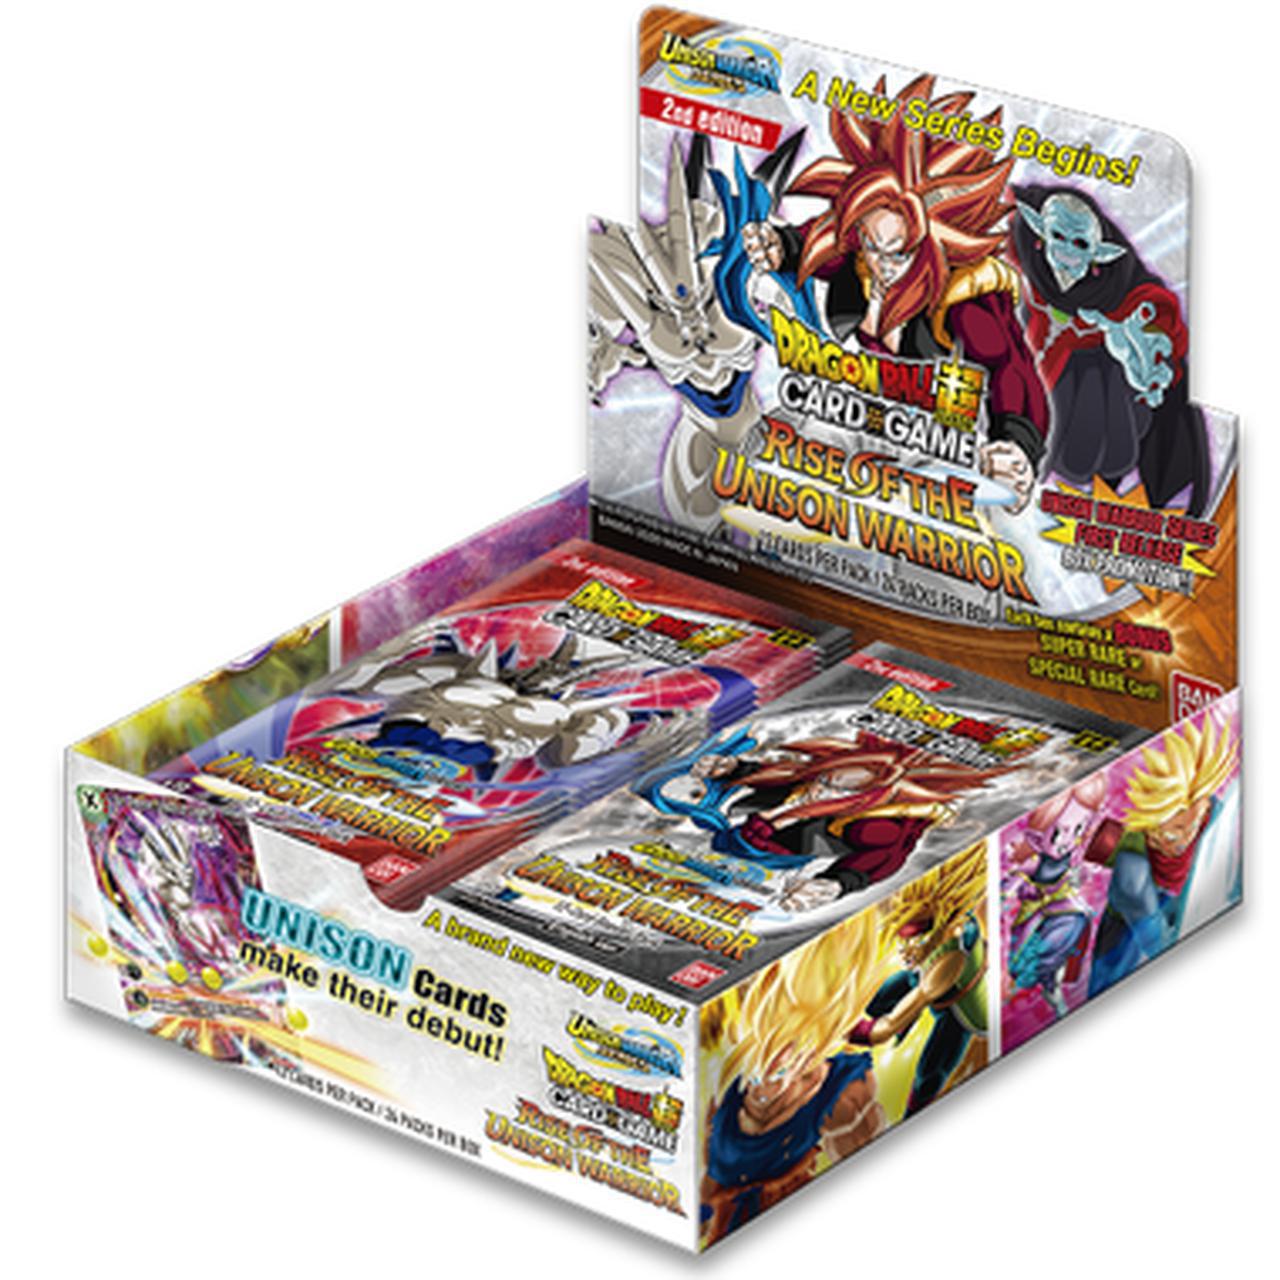 DBS Card Game - Unison Warrior Series 1 2nd Edition Boost: Rise of the Unison Warrior - 24-Packs SEALED Box